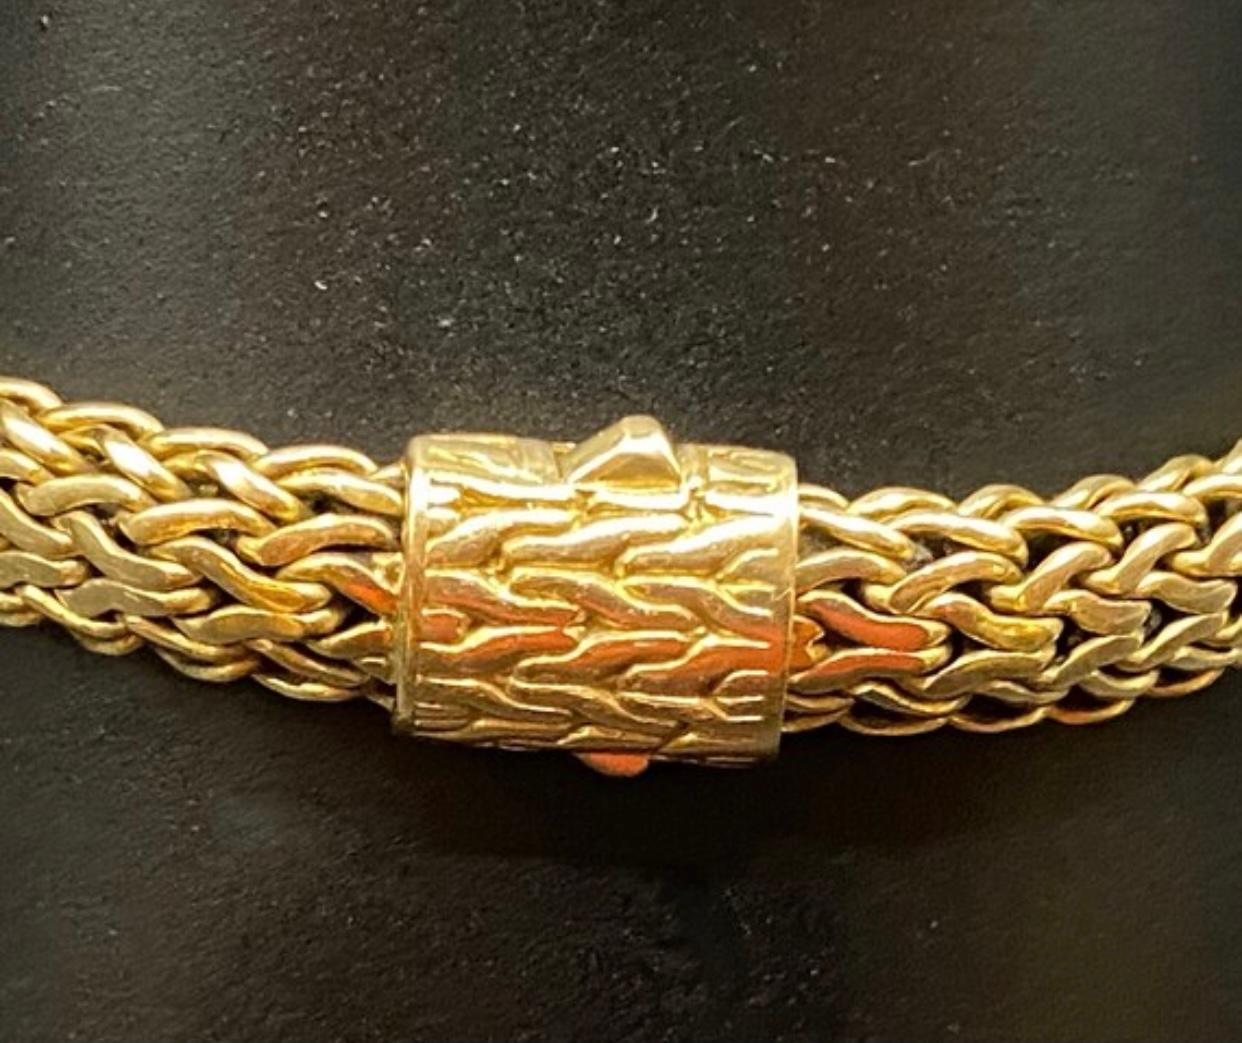 Designer John Hardy 18K Gold Classic Chain  Bracelet with Decorative Clasp.

Gorgeous, heavy gold, high quality craftsmanship.  Stamped and marked “JH” and “18k”.

8 1/4” length Size Large - X Large. 7.5 mm wide.  45 grams.

Retails $14,500